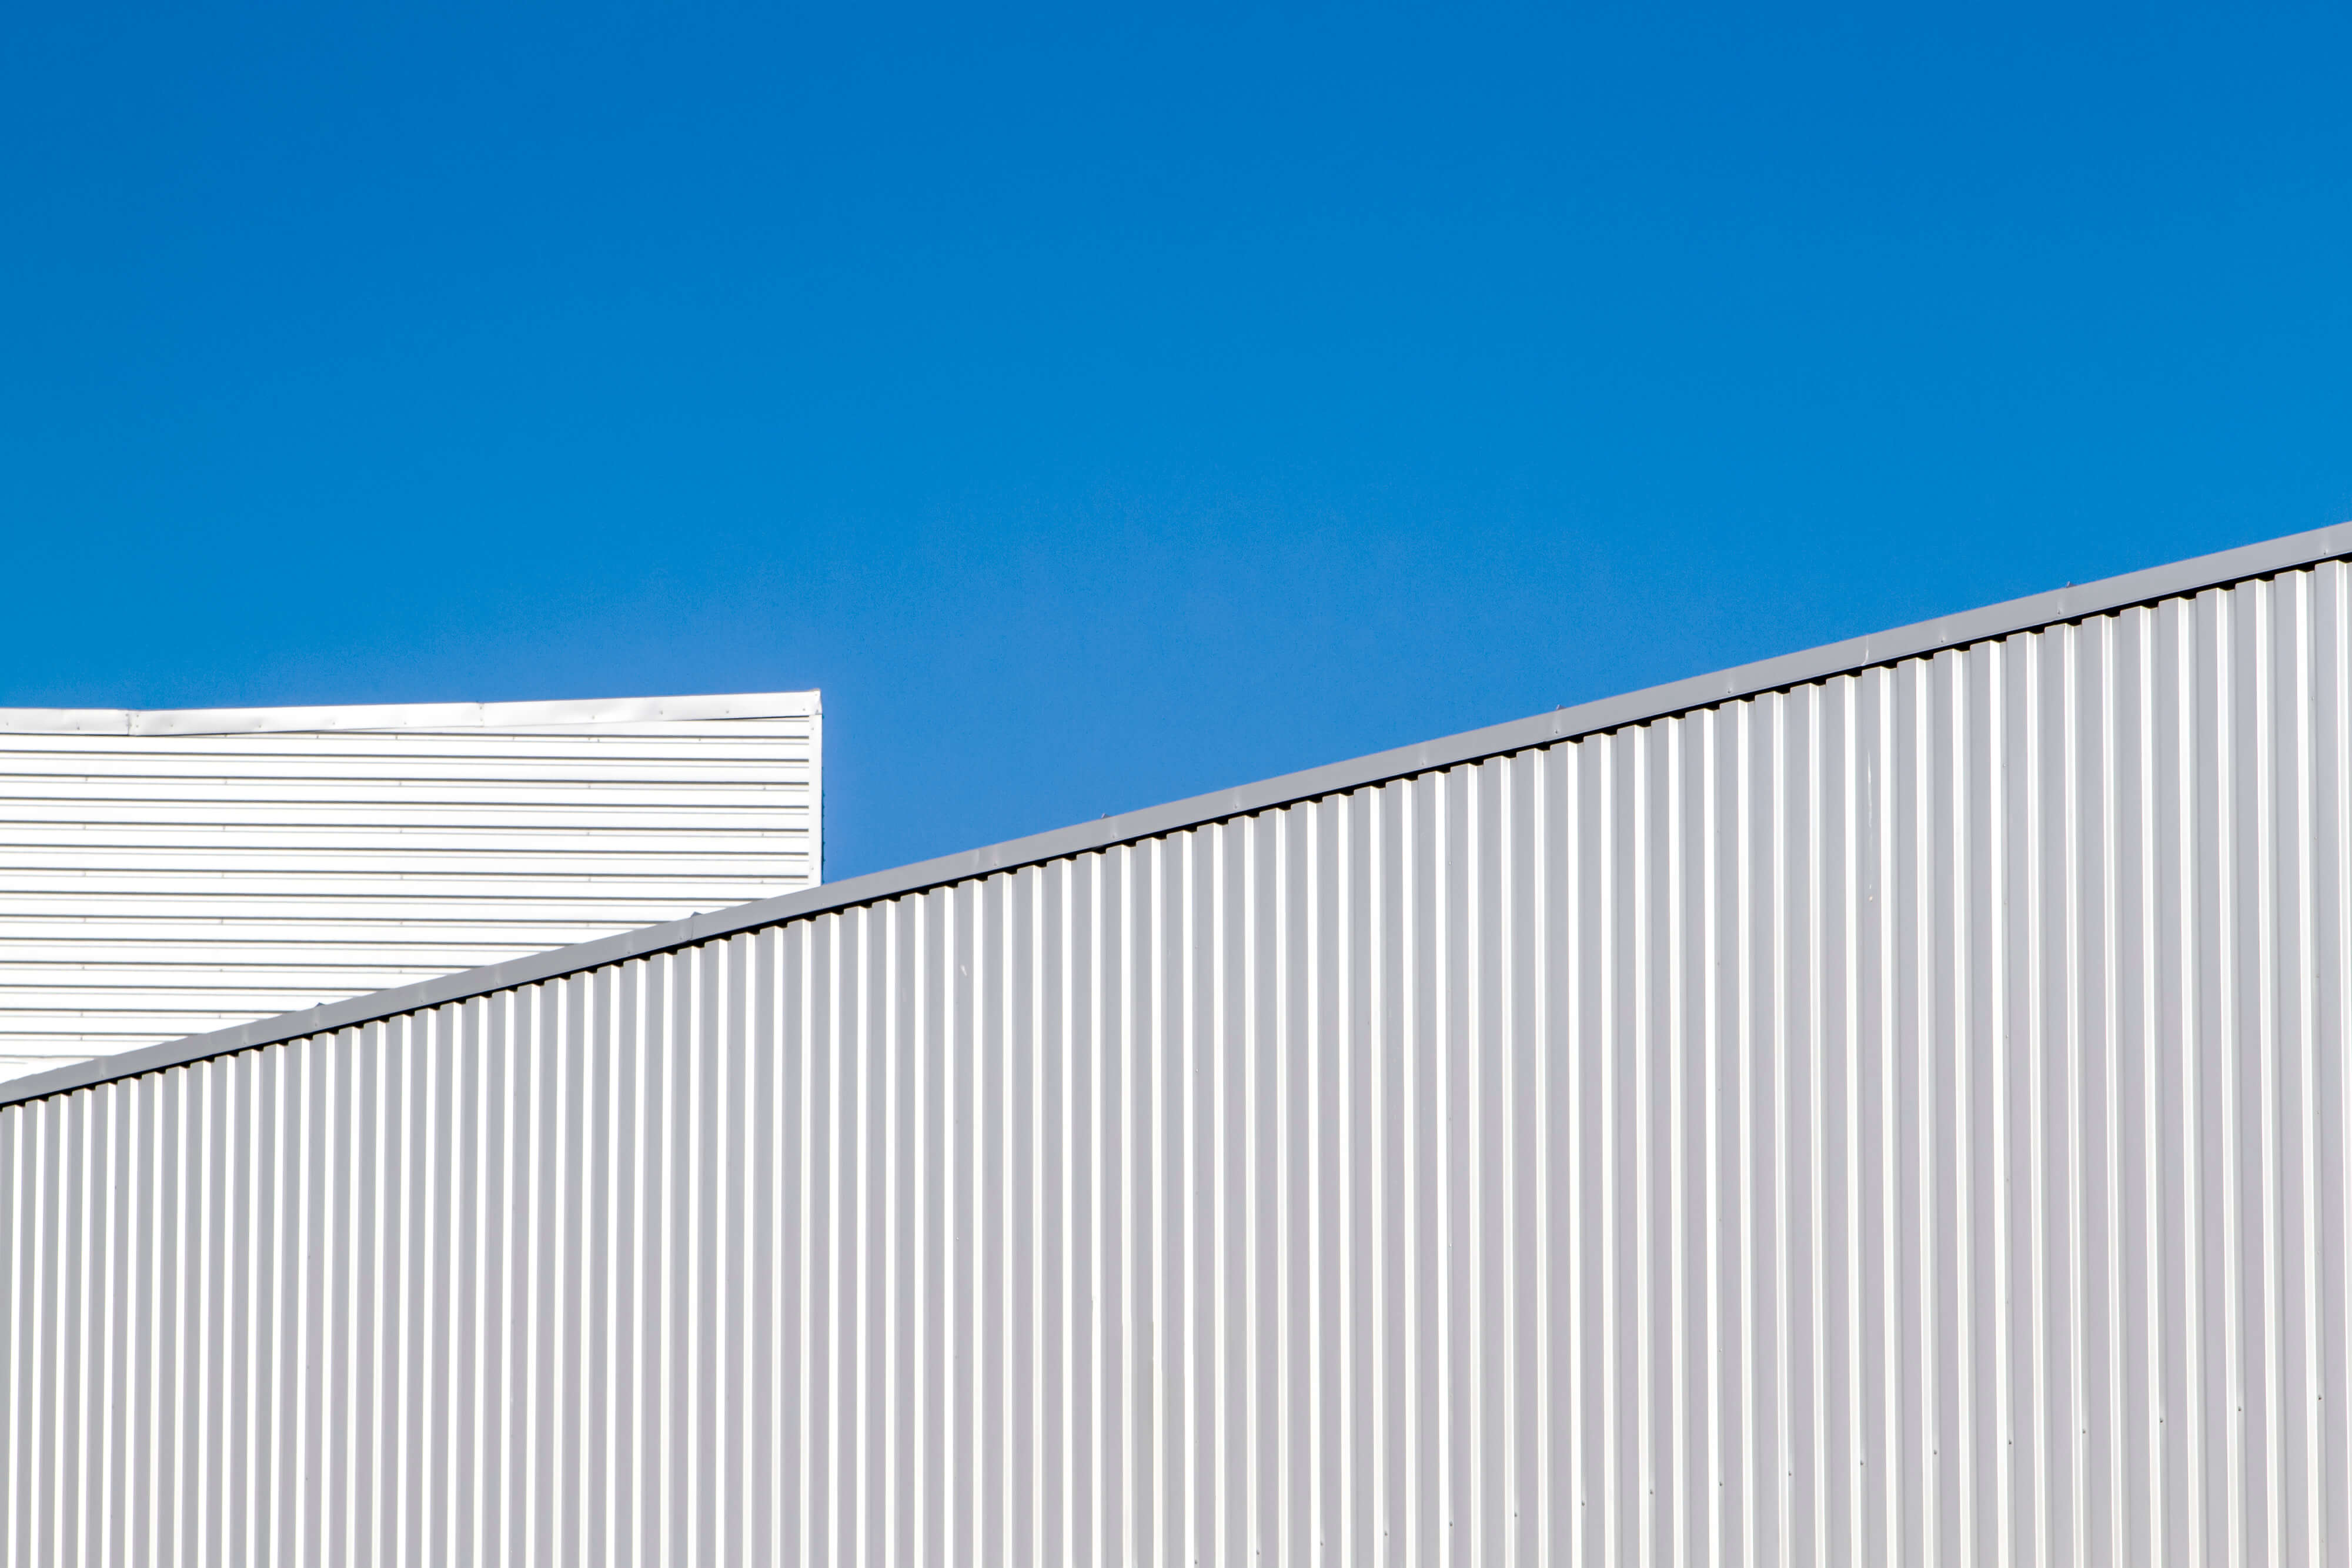 Corrugated sheet metal wall and roof against blue sky. Modern